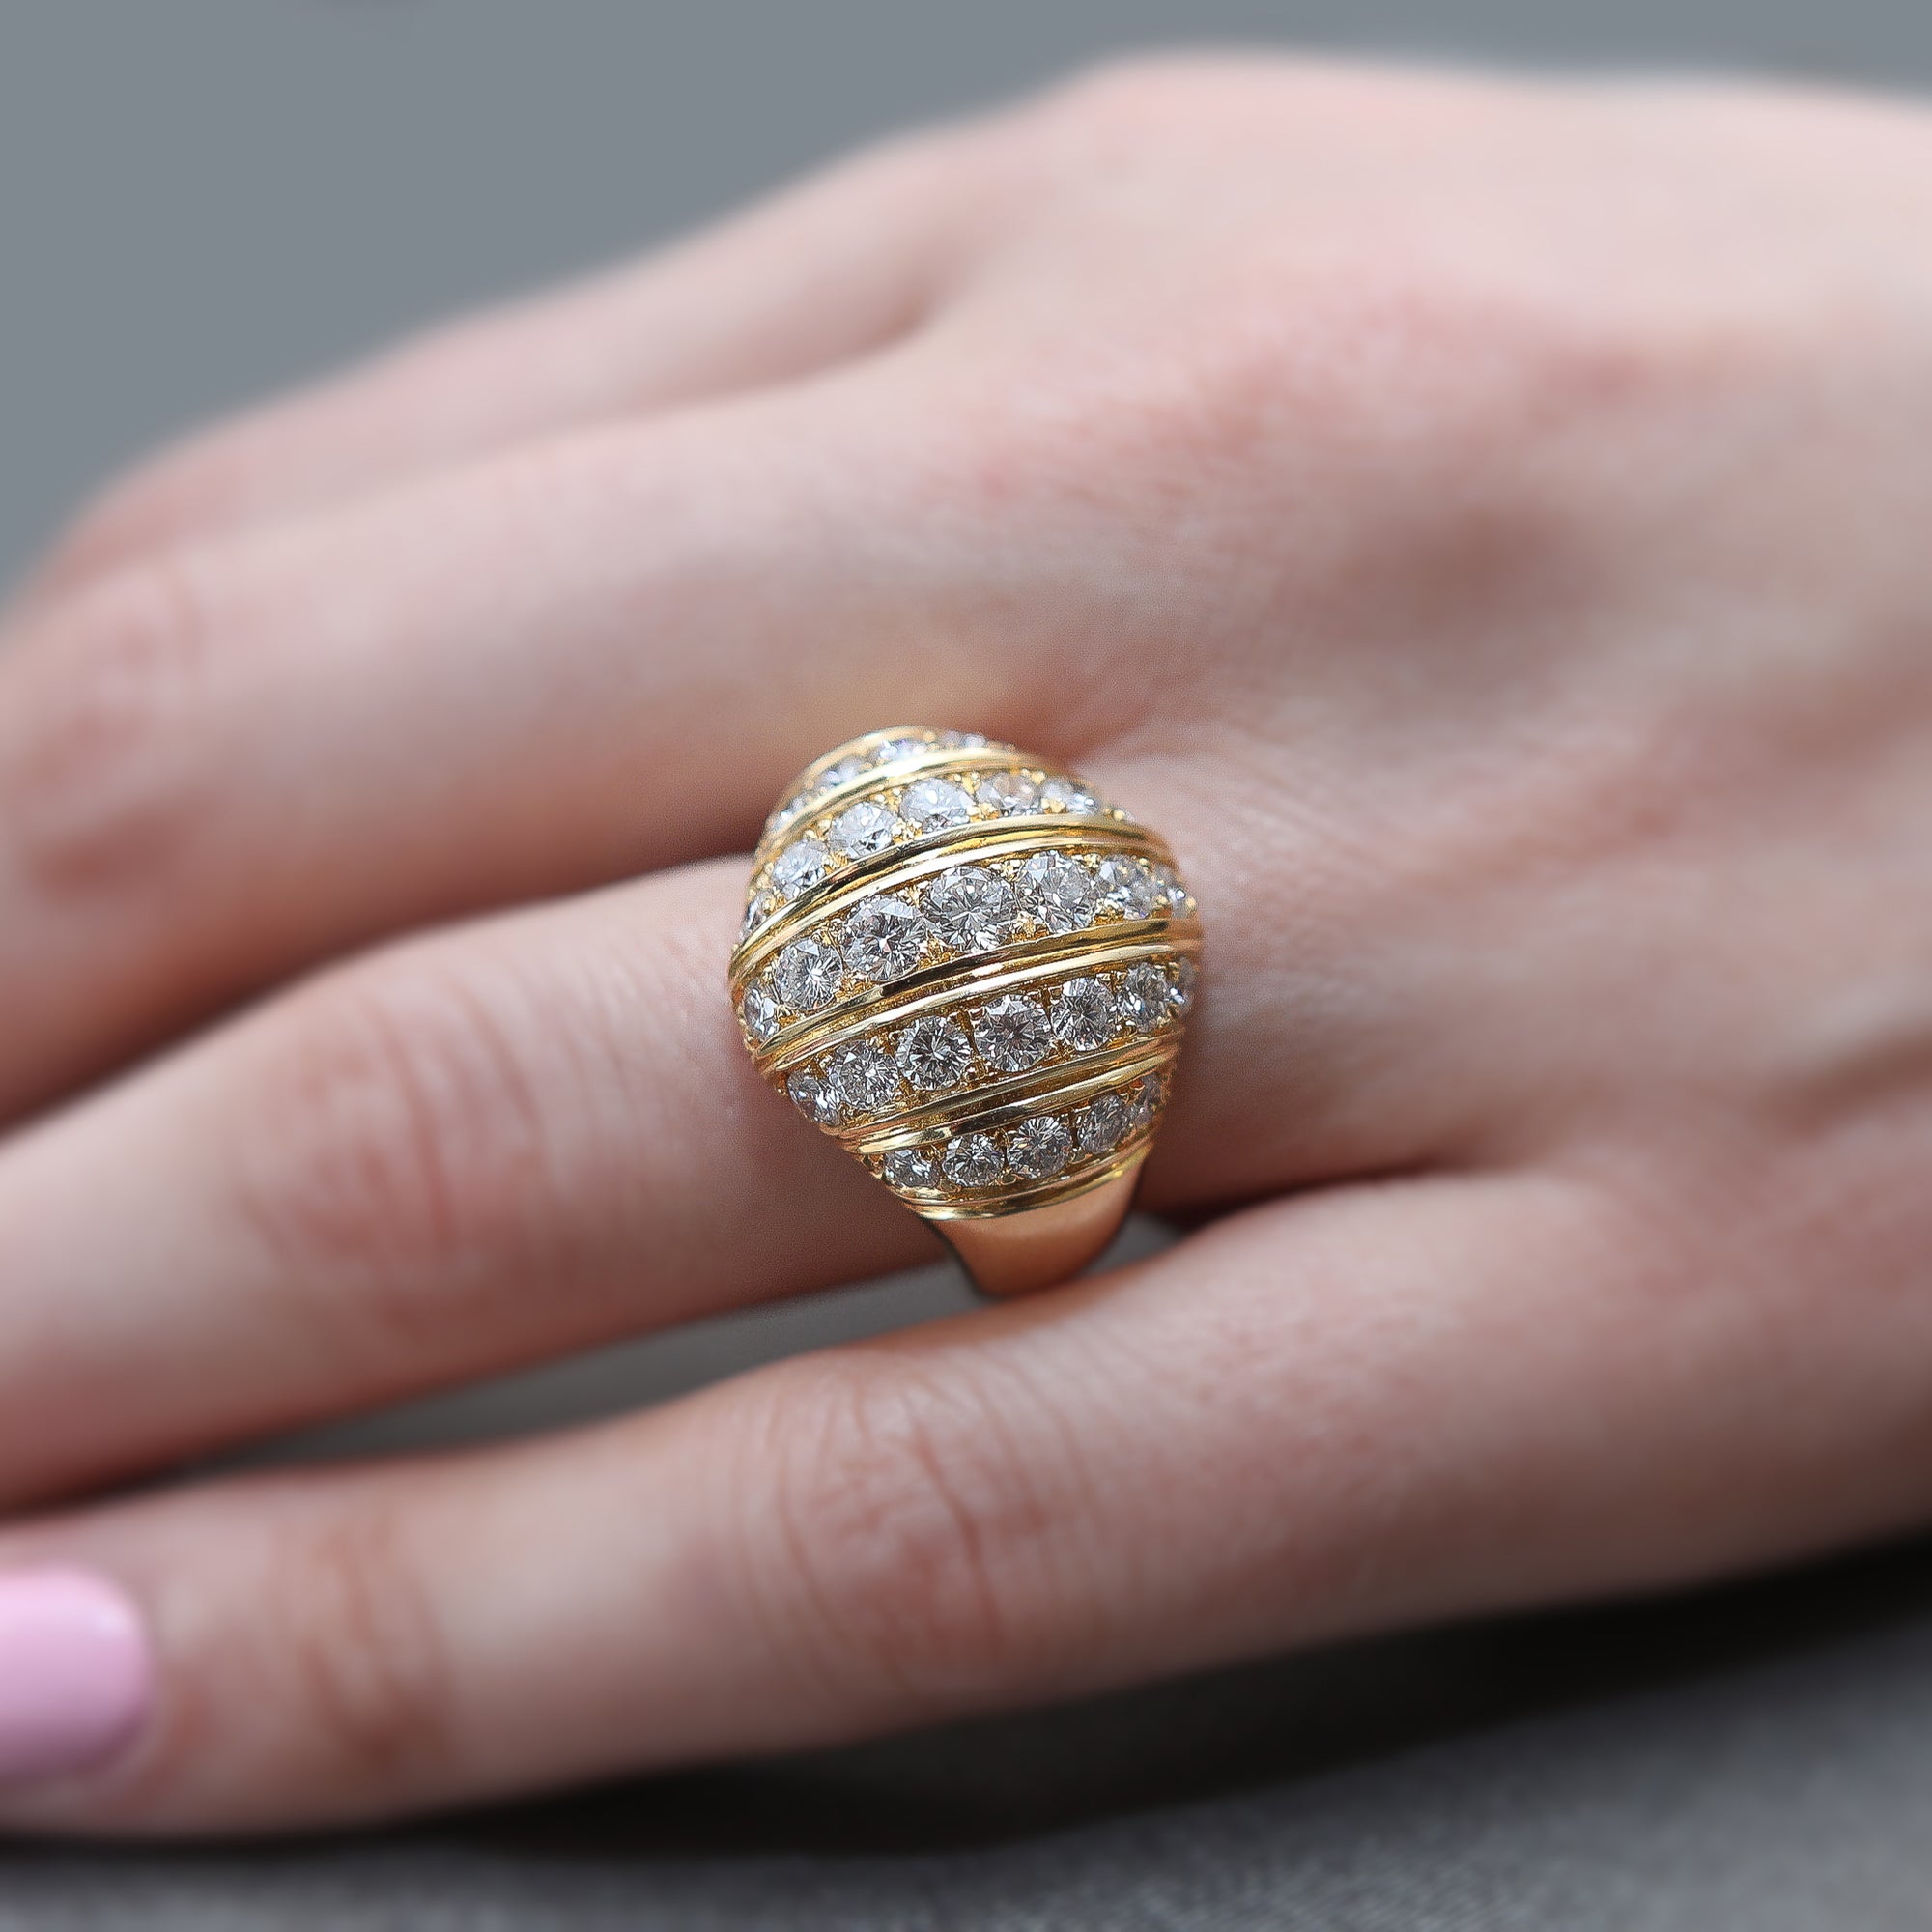 A yellow gold ring with diamonds set in vertical rows, part of the Etruscan Revival Collection